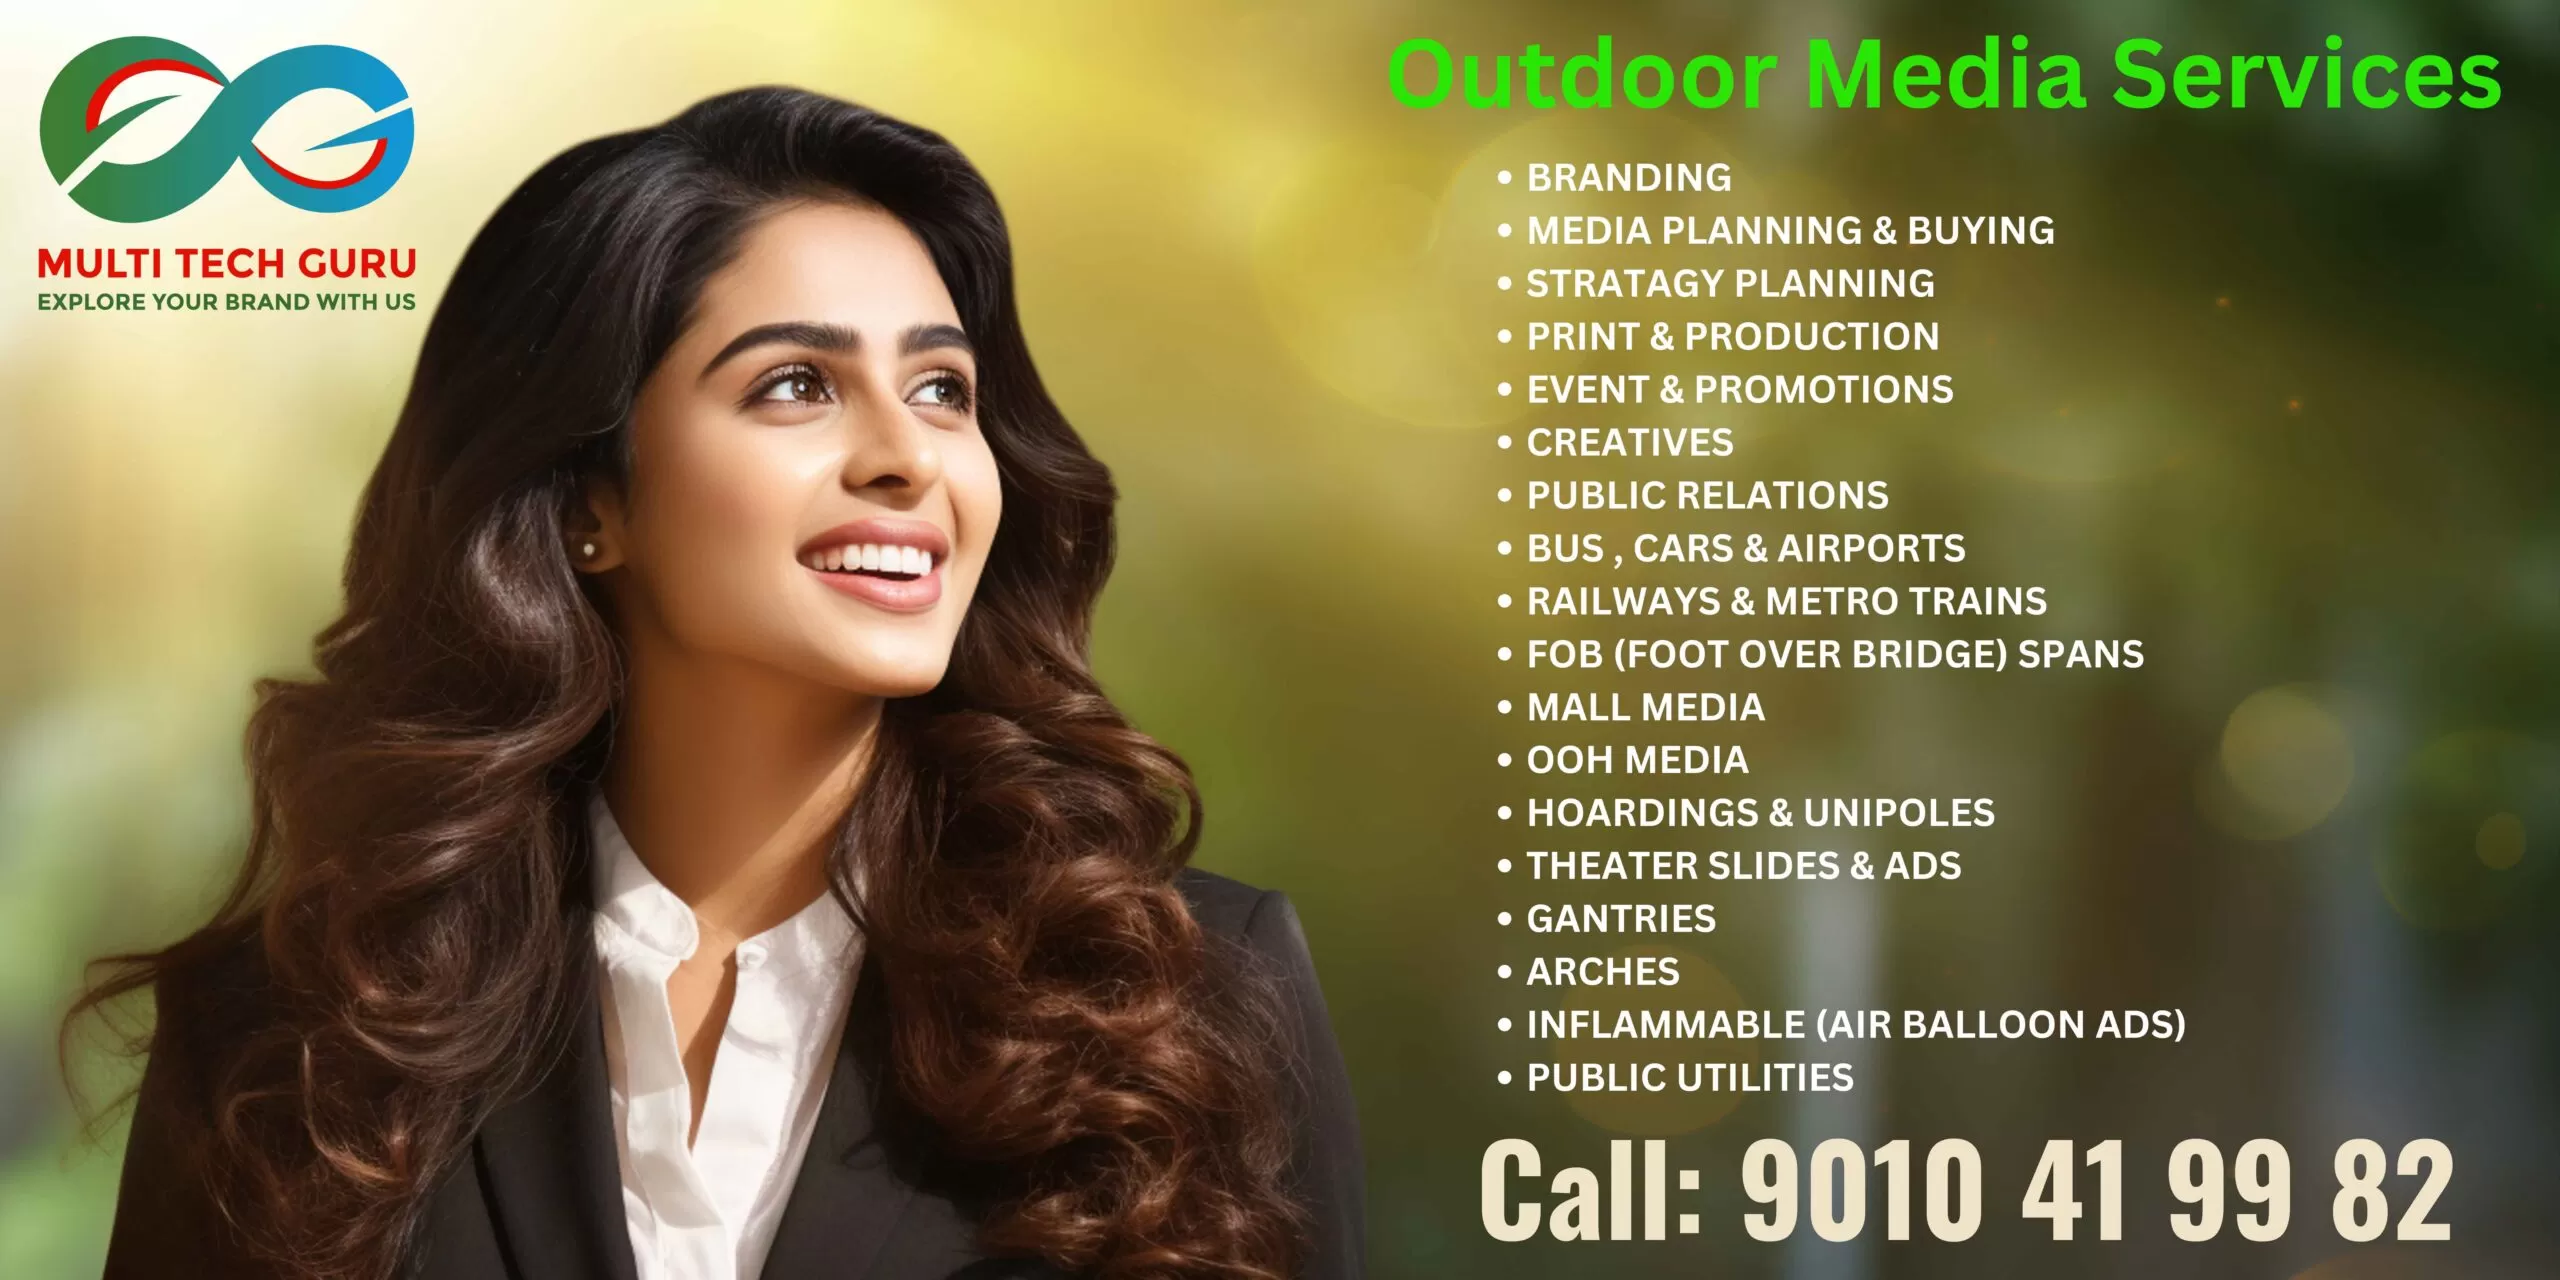 Outdoor Media Services- Branding Services List-Explore Your Brand With us-Multitechguru.com-9010419982- advertising-branding-marketing-sales-design-print and electronic media services